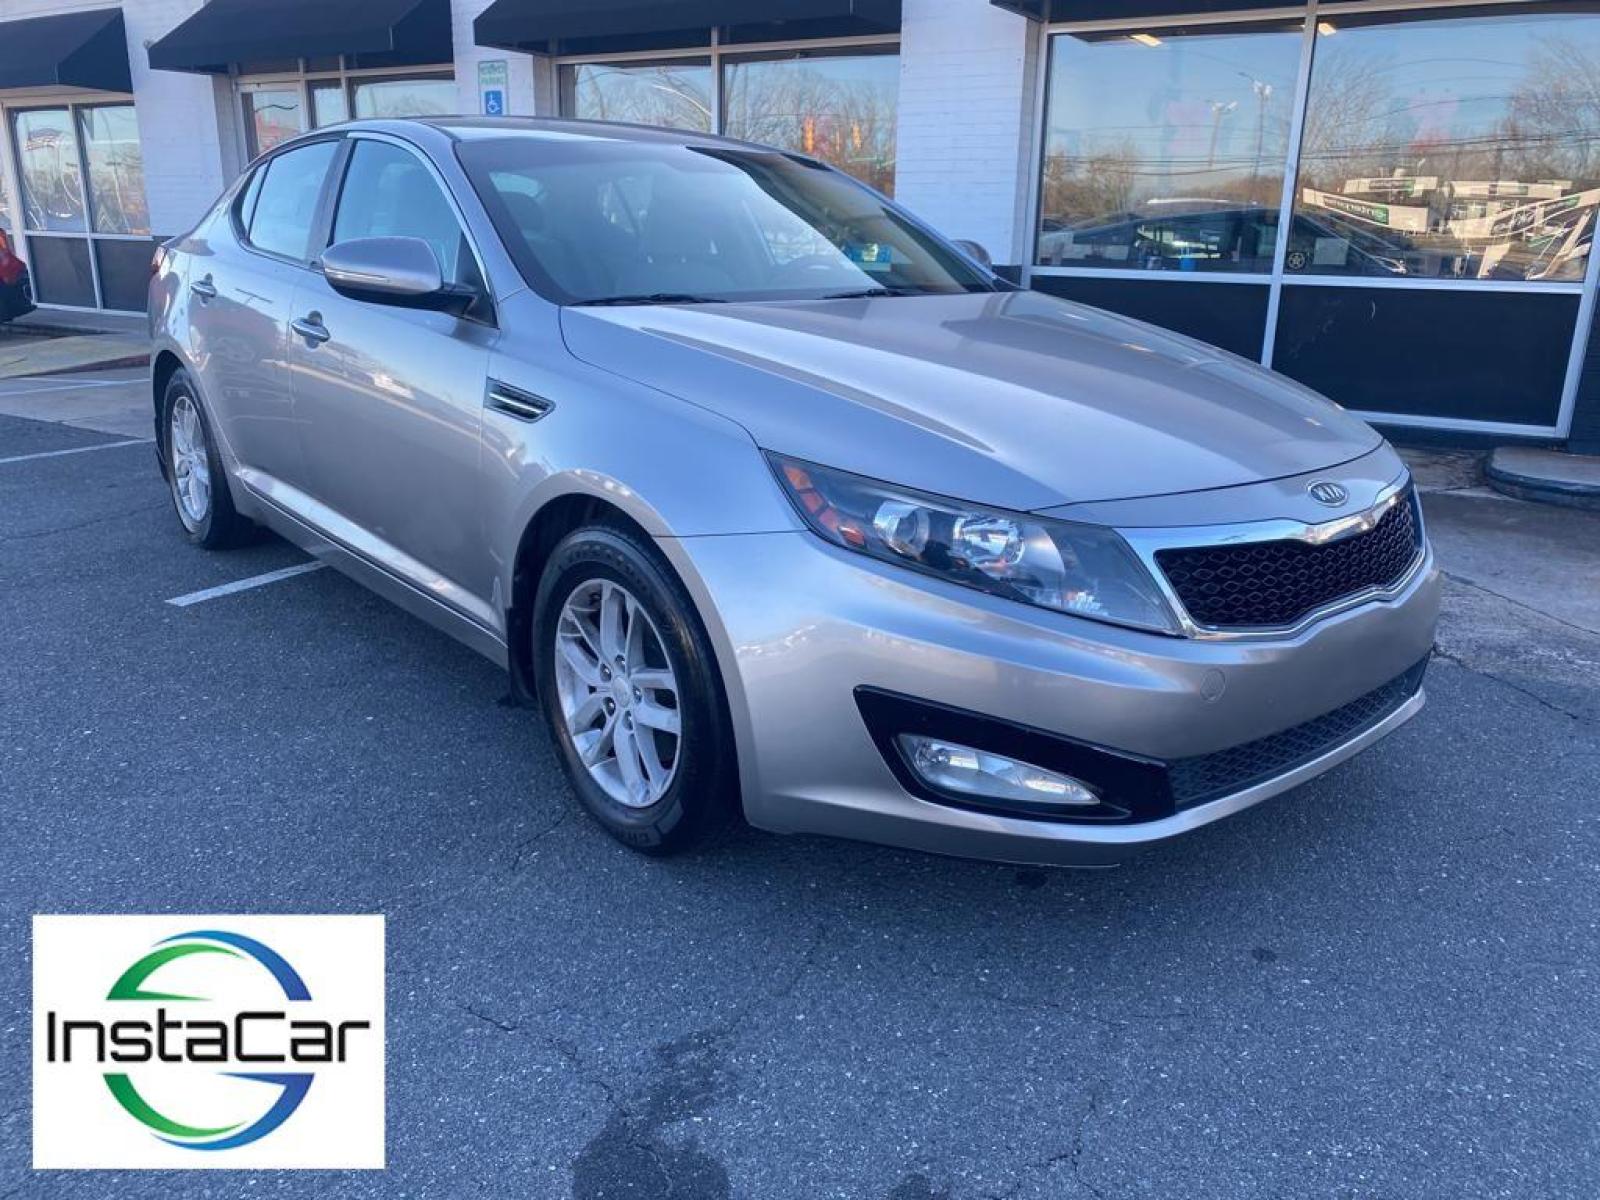 2012 Silver Kia Optima LX (KNAGM4A71C5) with an L4, 2.4L engine, Automatic transmission, located at 3147 E Independence Blvd, Charlotte, NC, 28205, 35.200268, -80.773651 - <b>Equipment</b><br>The Kia Optima features a hands-free Bluetooth phone system. This Kia Optima has satellite radio capabilities. This unit gleams with an elegant silver clear coated finish. Front wheel drive on the Kia Optima gives you better traction and better fuel economy. This mid-size car has - Photo #1